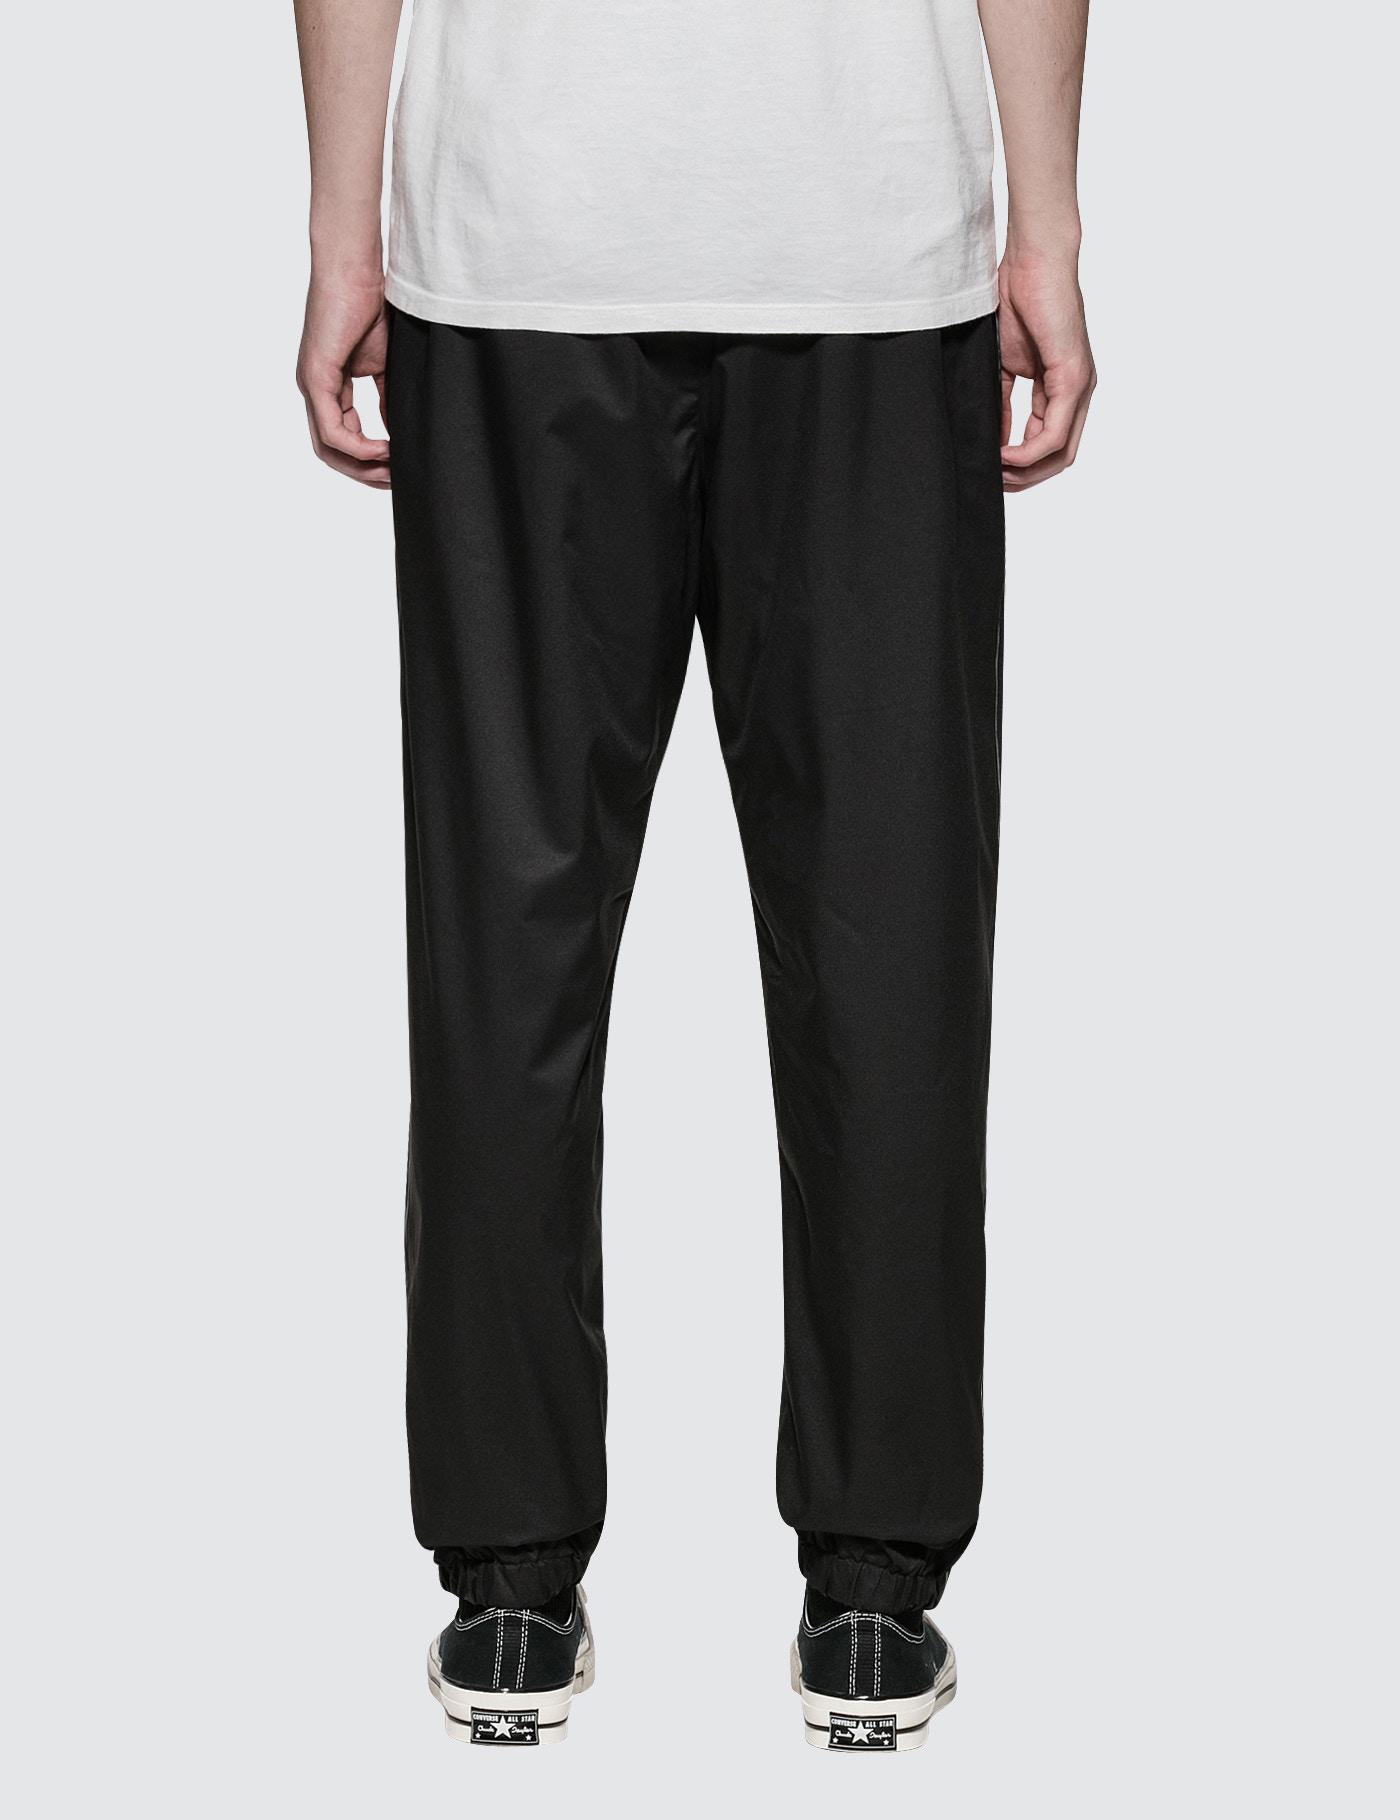 Lyst - Stussy 3m Piping Pants in Black for Men